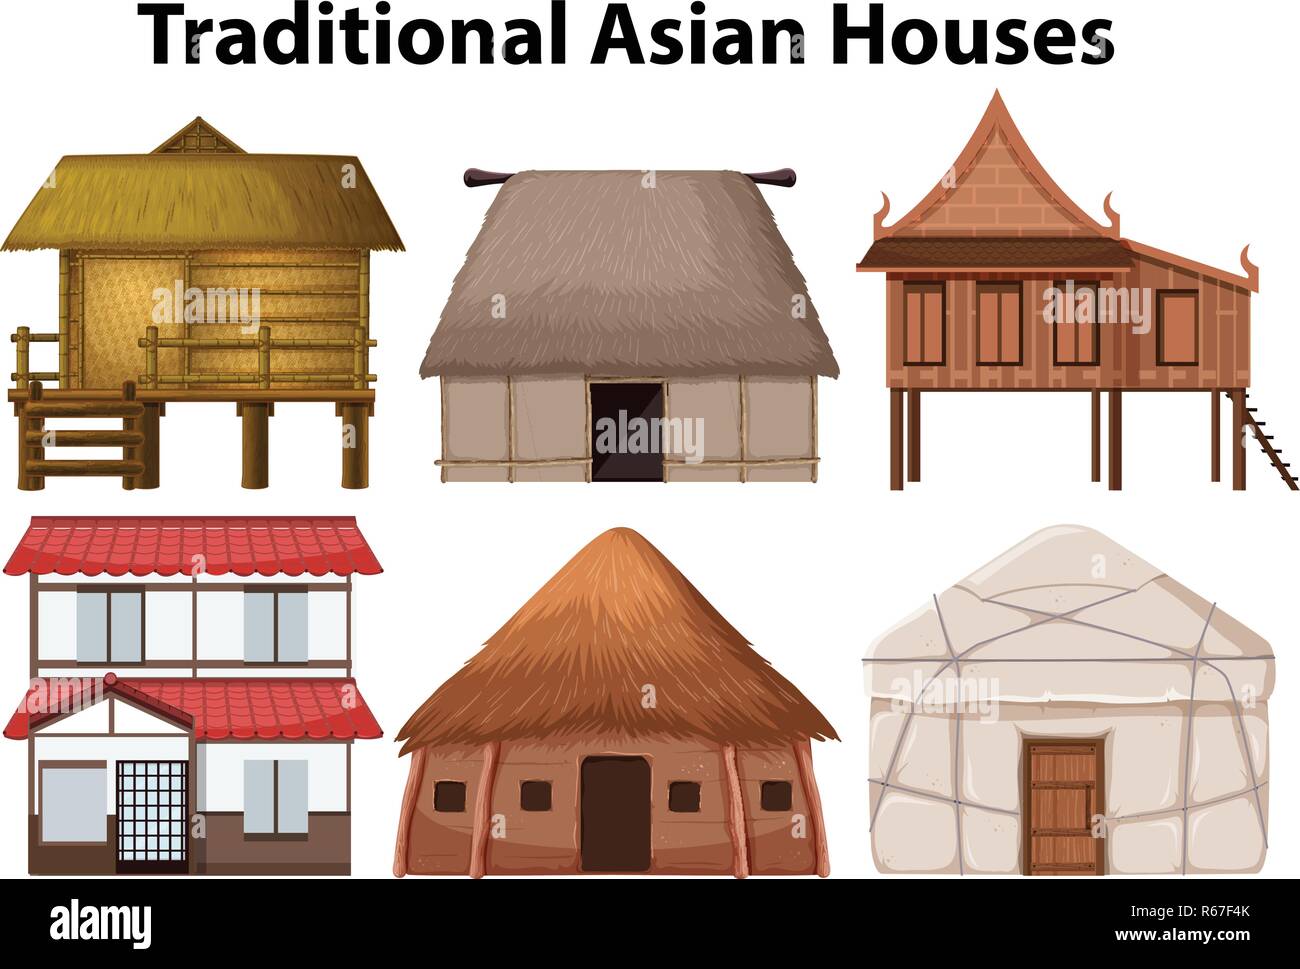 Set of traditional house illustration Stock Vector